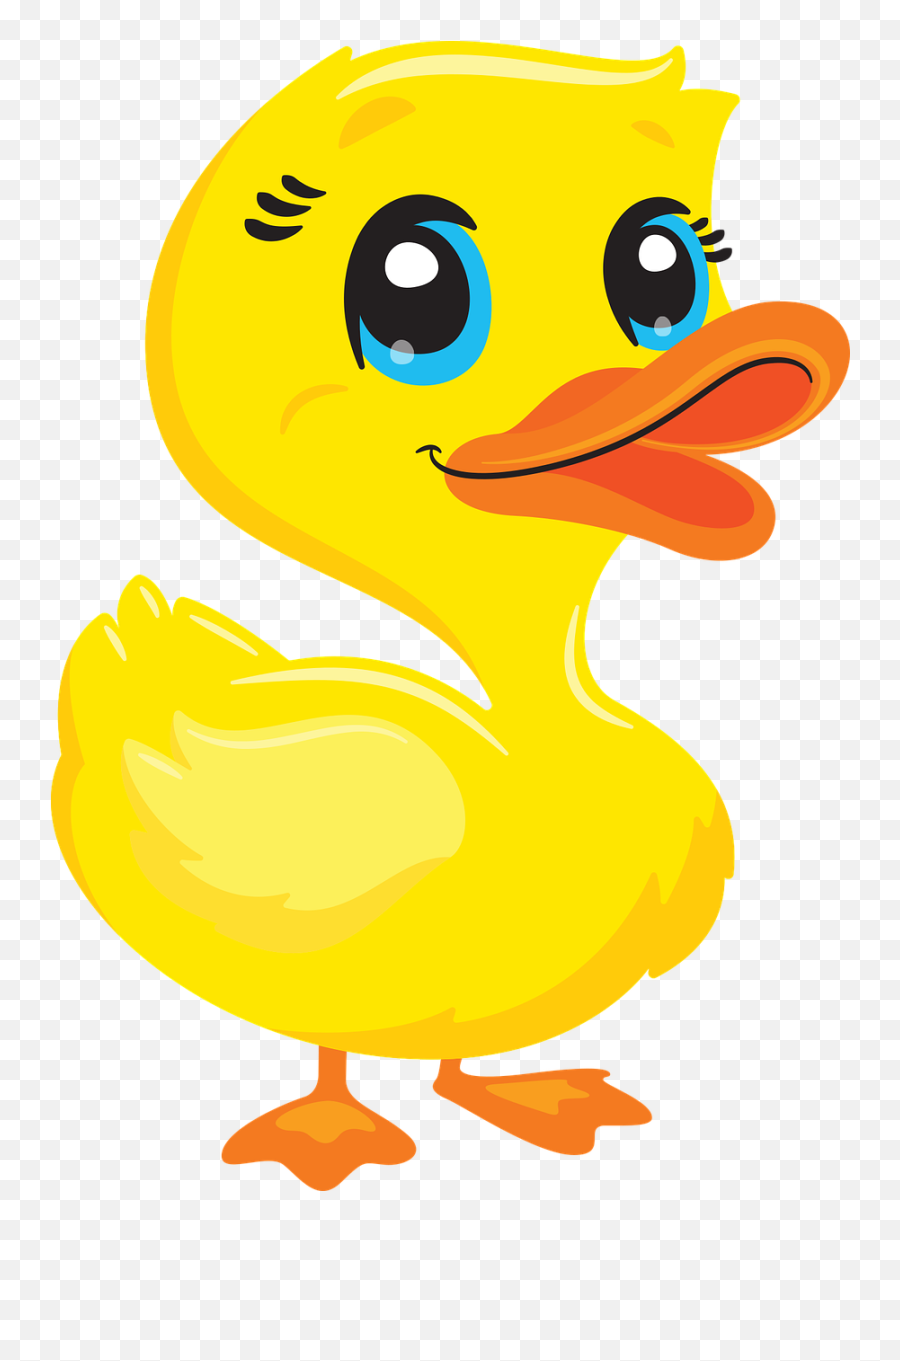 Duck Animal Vector - Free Vector Graphic On Pixabay Emoji,Duck Face Clipart